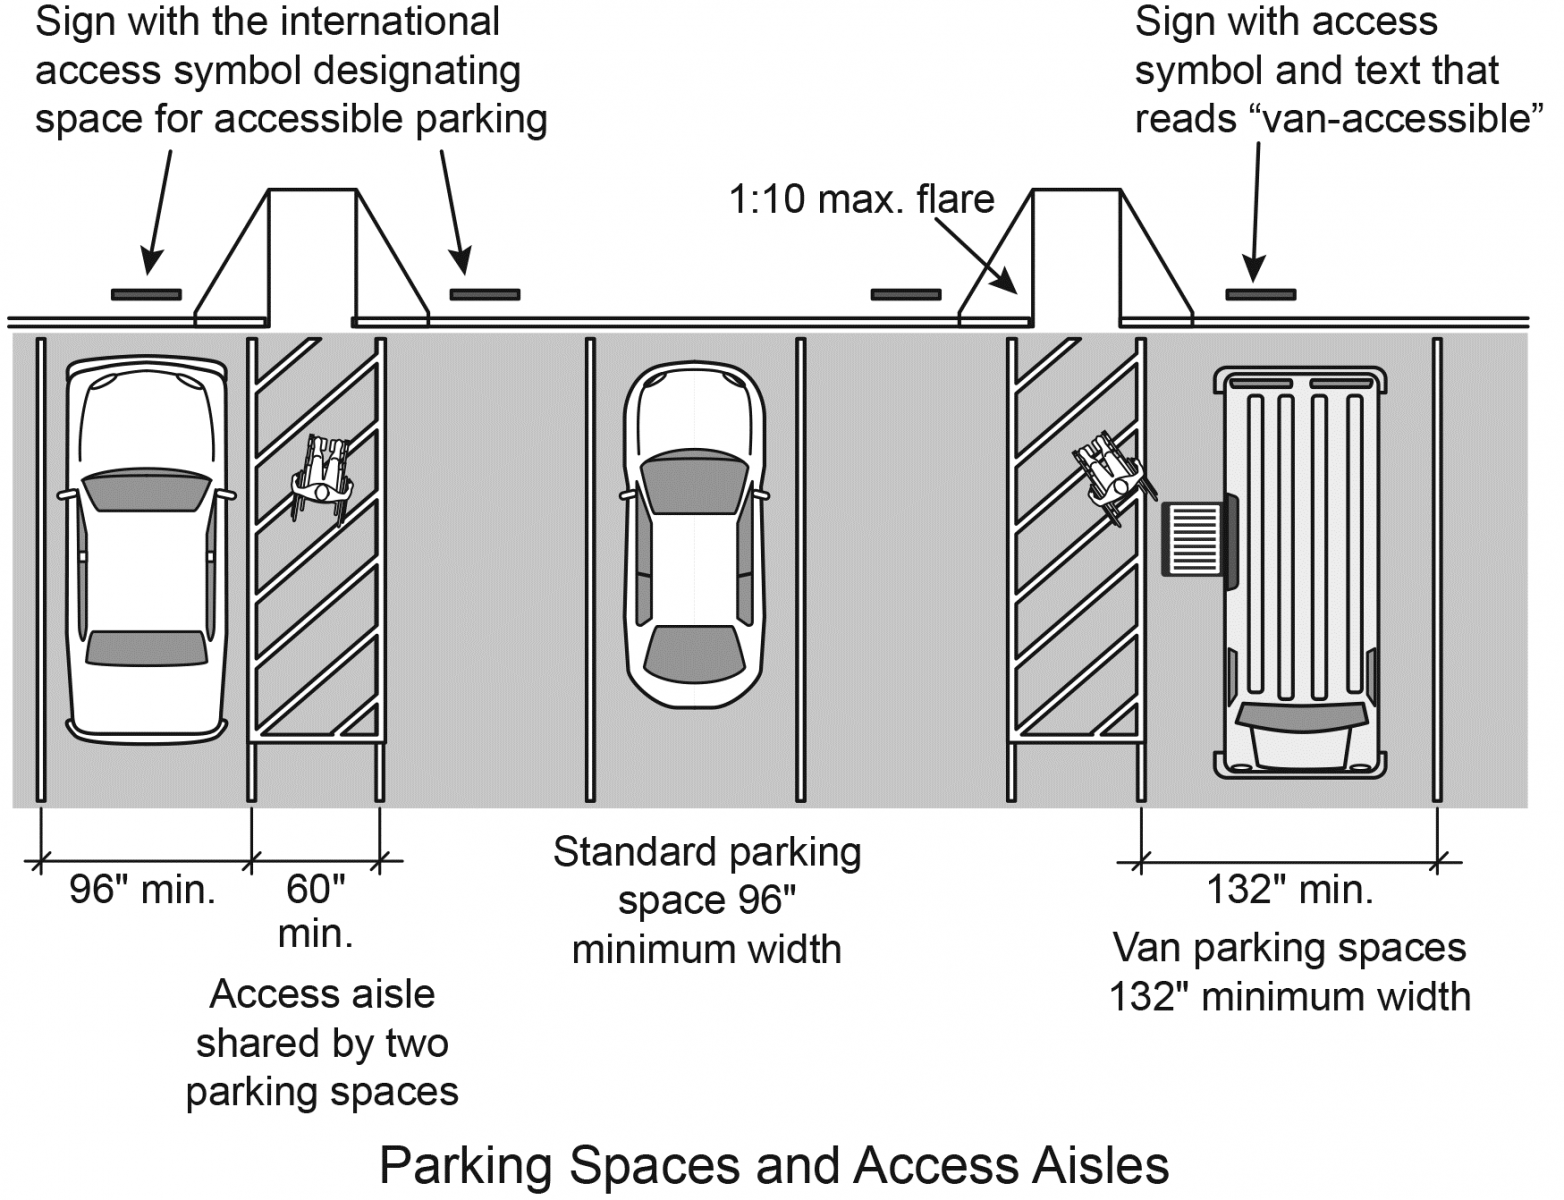 Figure 5: Access aisles next to accessible parking spaces must be at least 60 inches wide. Accessible van parking spaces must be at least 132 inches wide; accessible car spaces must be at least 96 inches wide. Signs at each space read “Van-accessible” and show the access symbol.